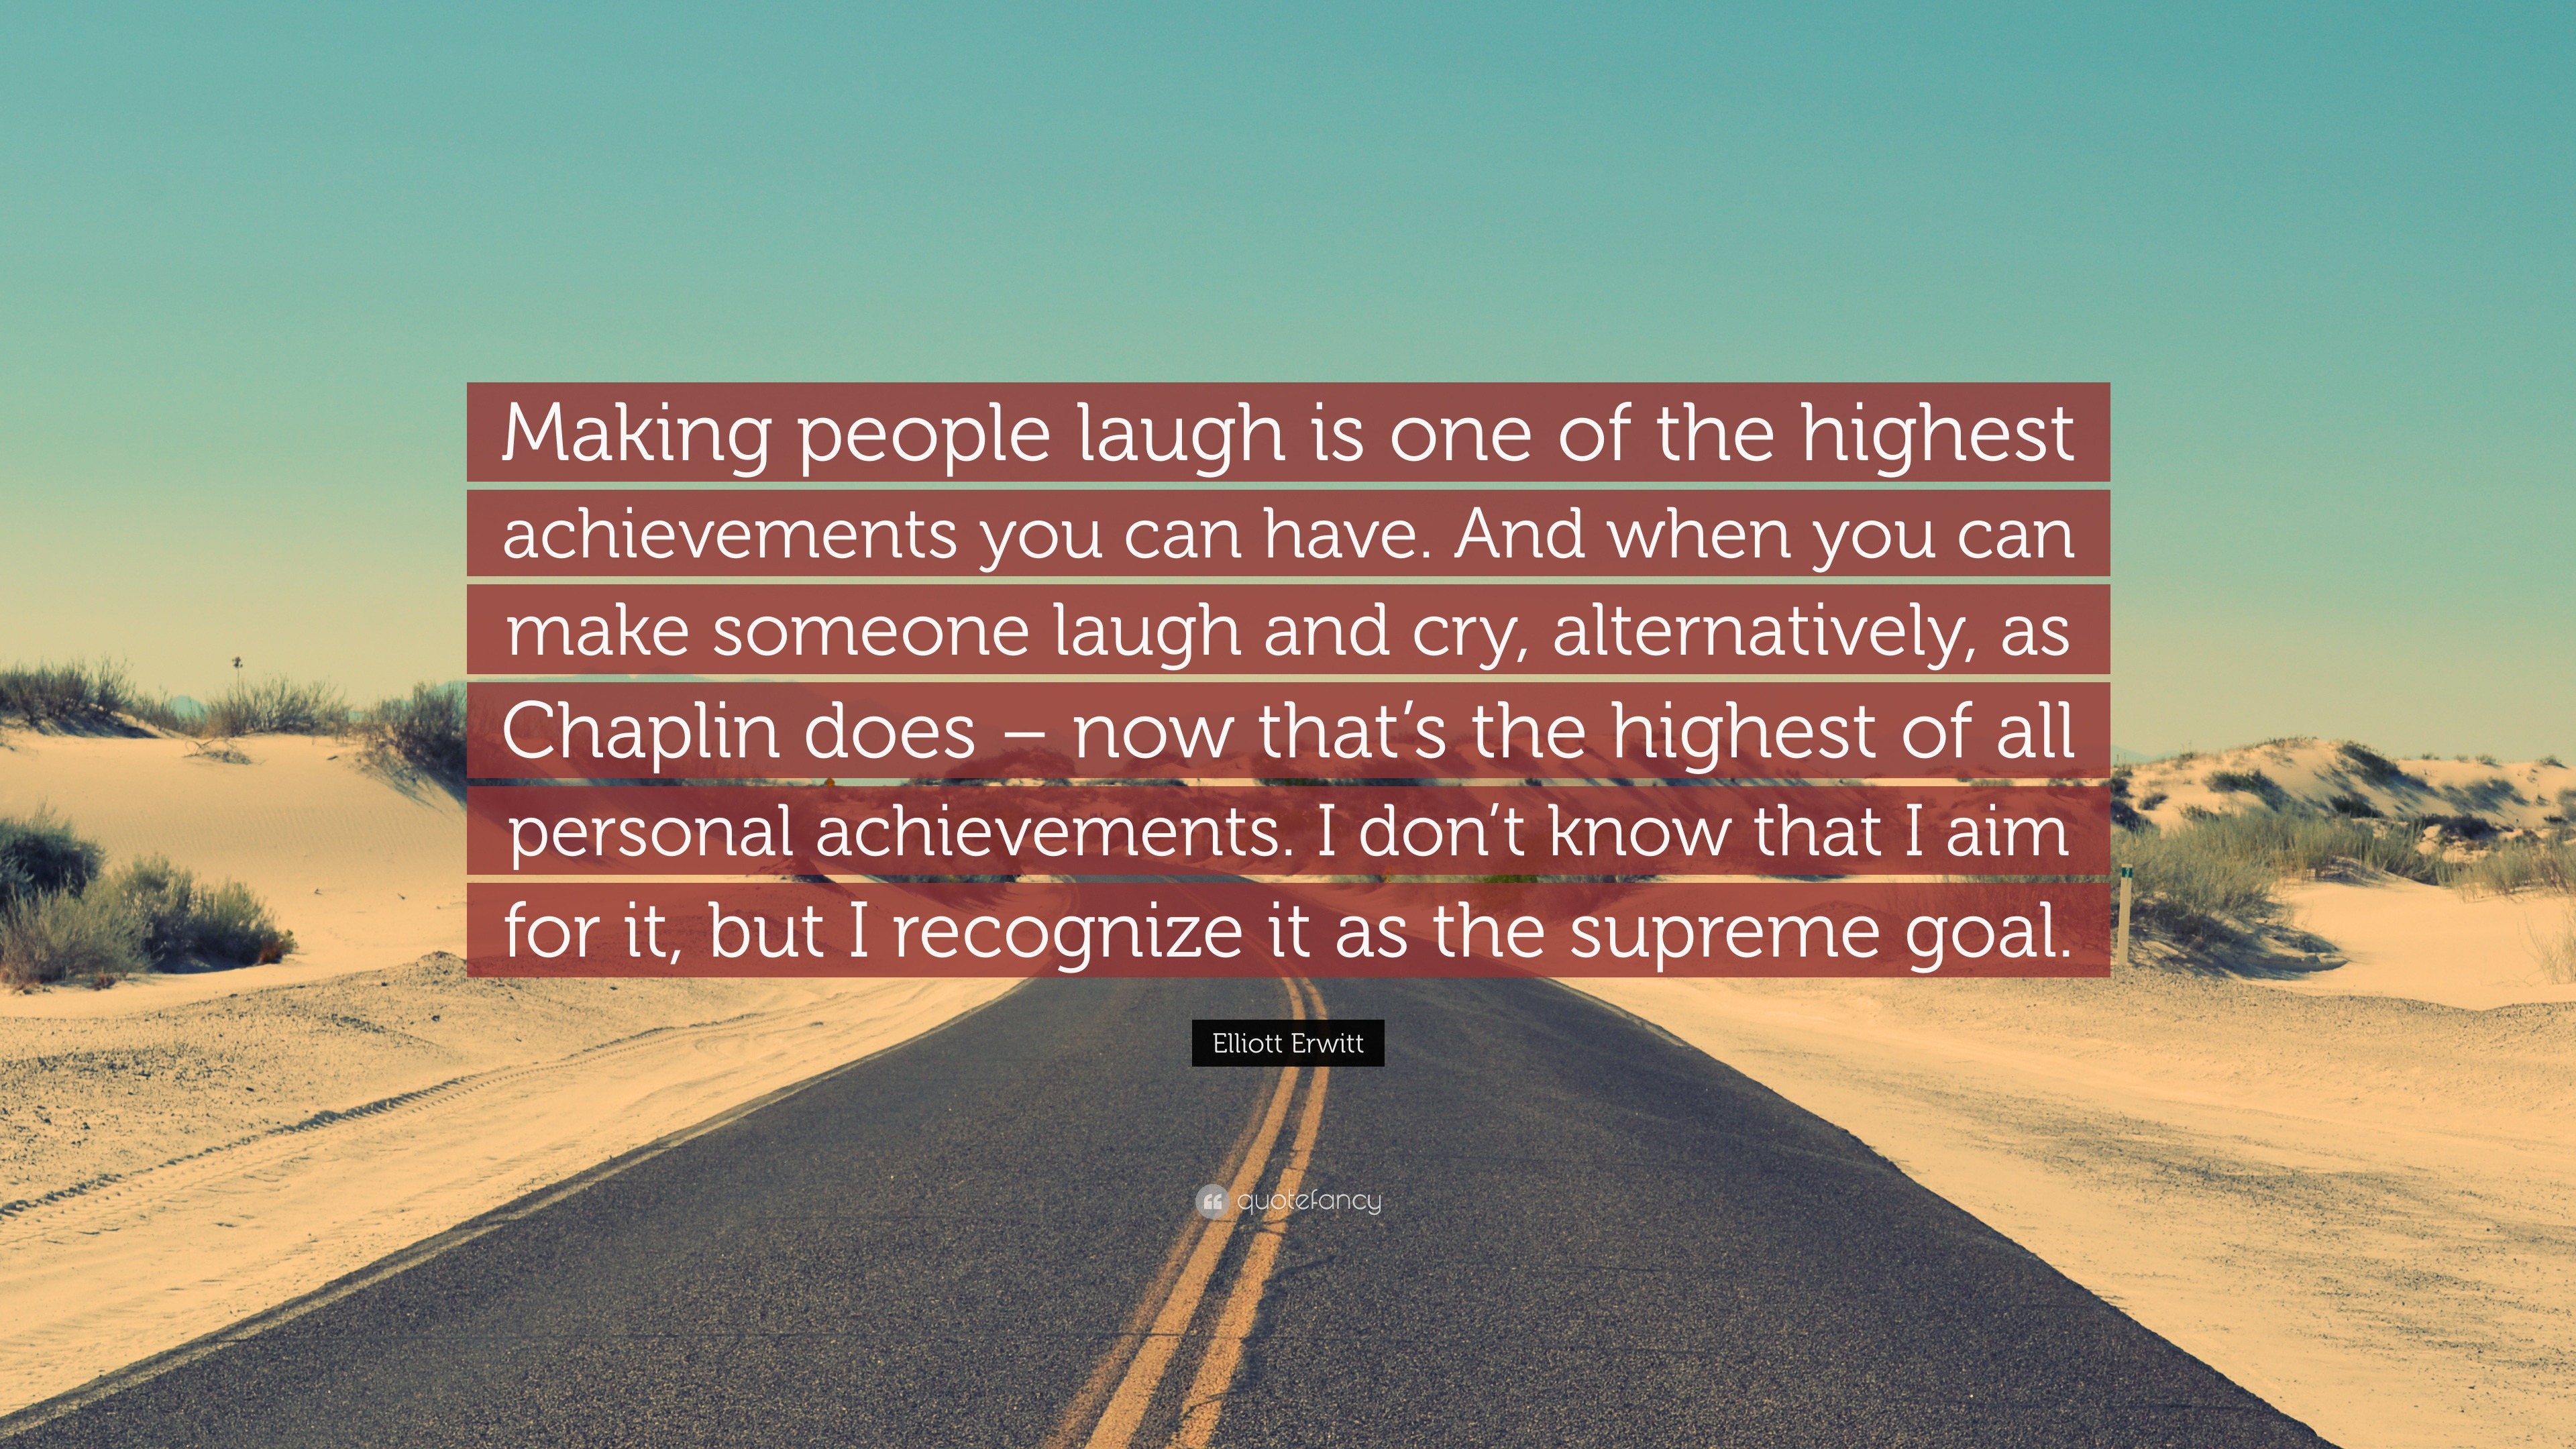 Elliott Erwitt Quote “Making people laugh is one of the highest achievements you can